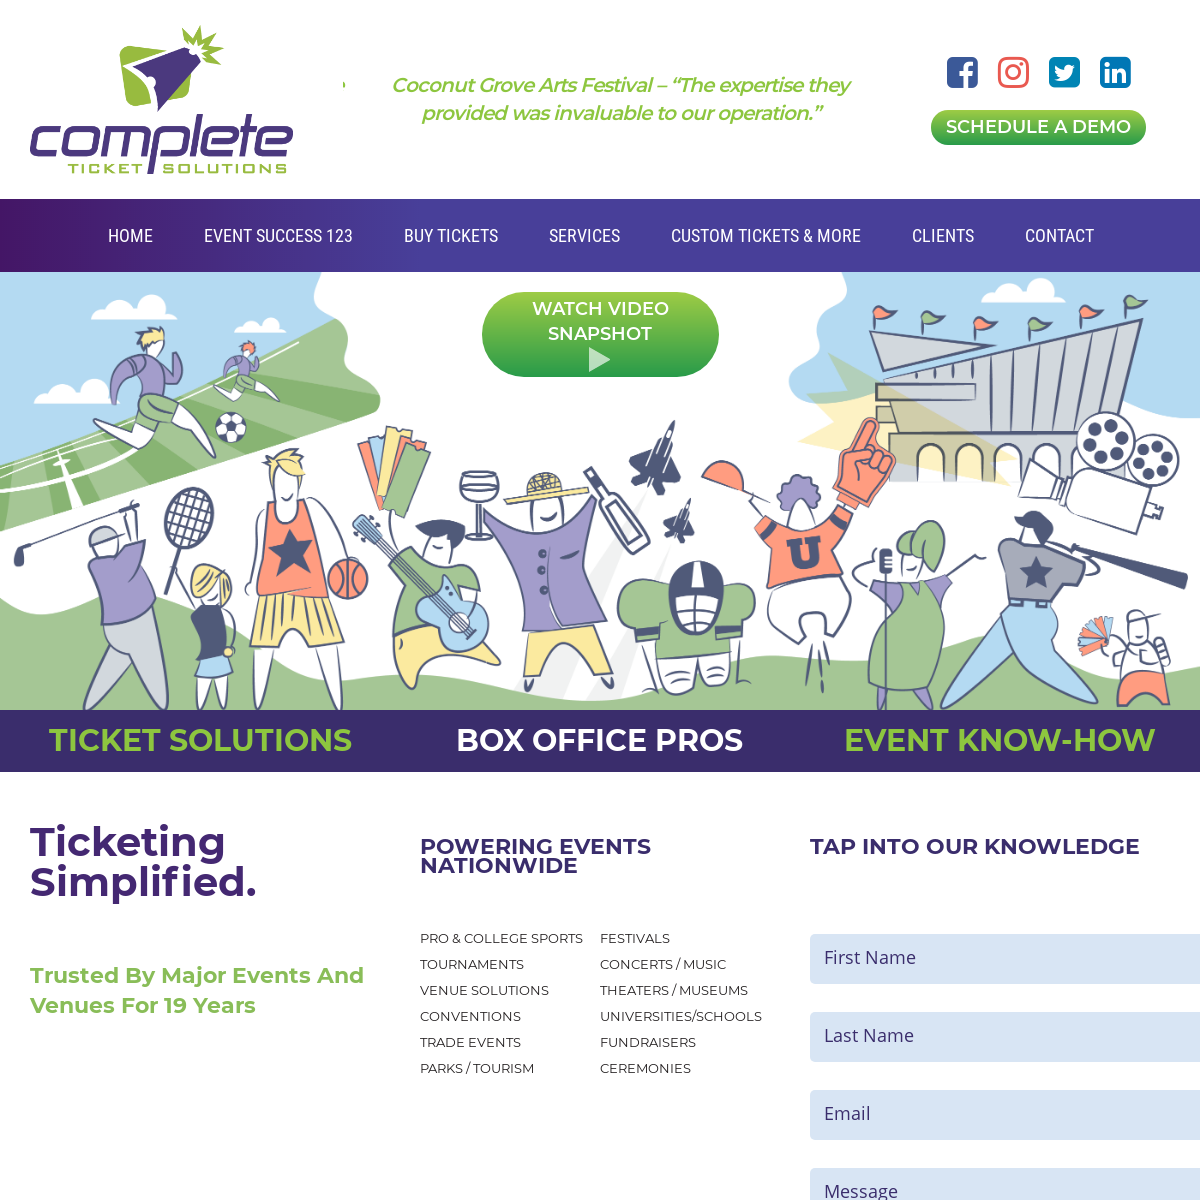 A complete backup of completeticketsolutions.com